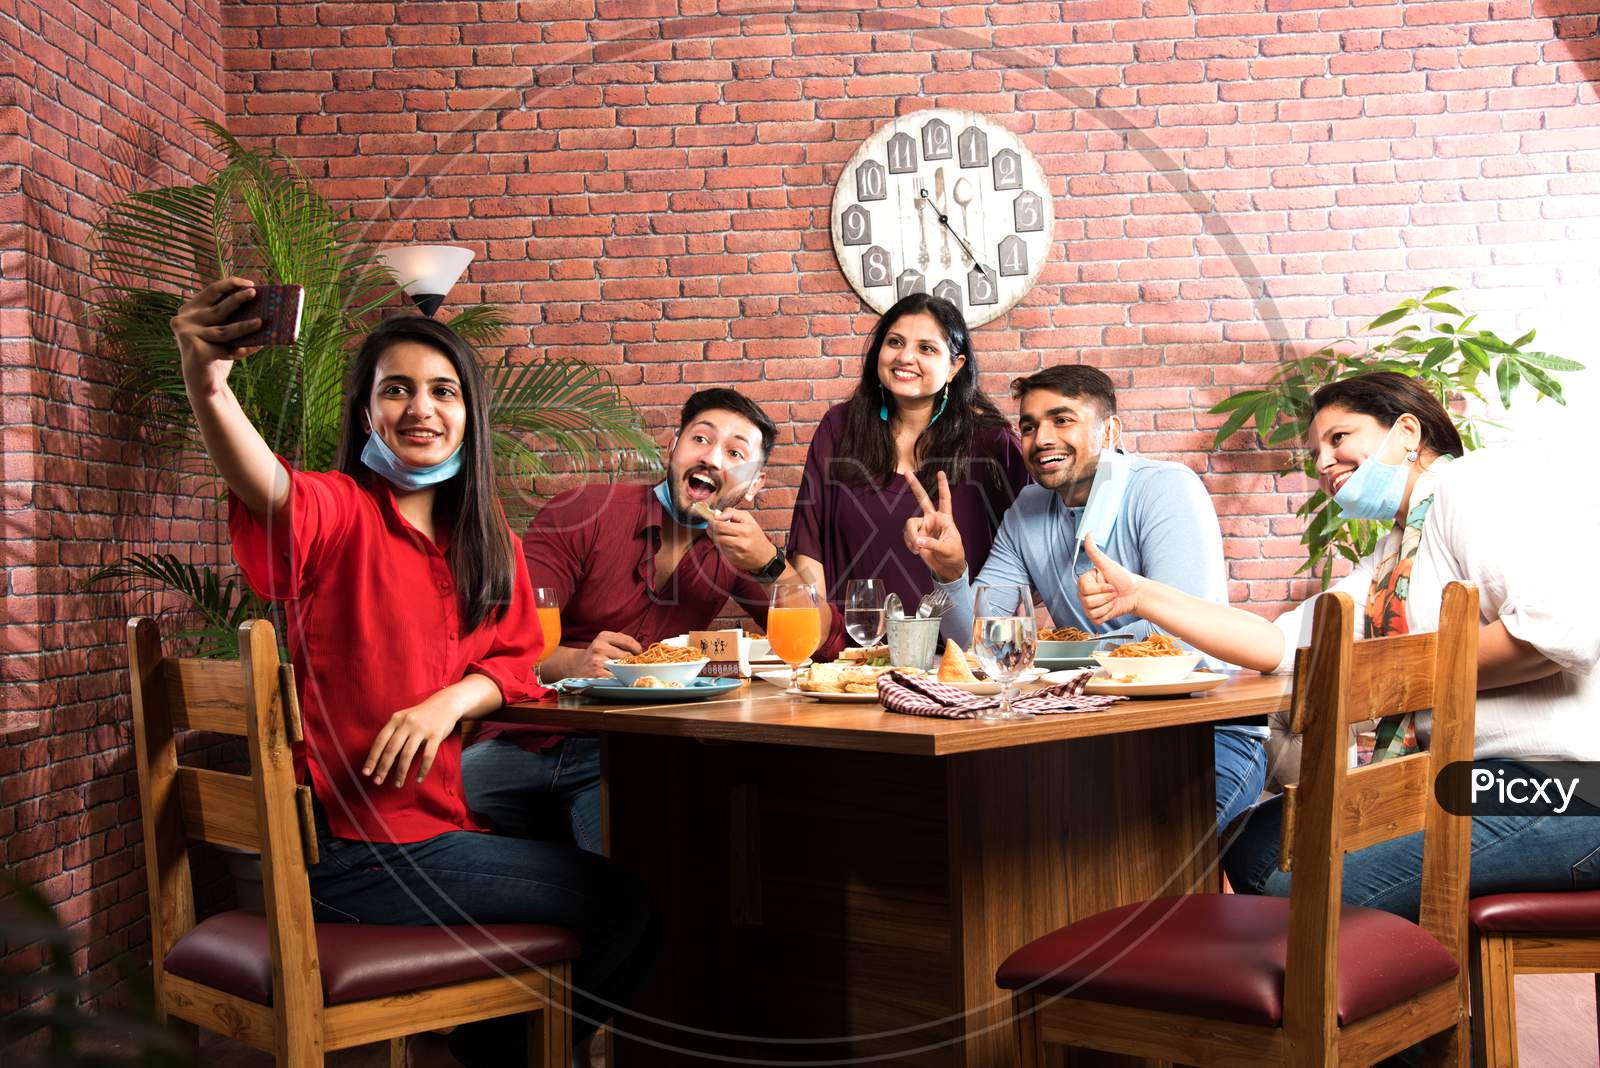 Indian Asian Young Friends Eating Food In Restaurant After Corona Virus Pandemic Or In Unlock Phase